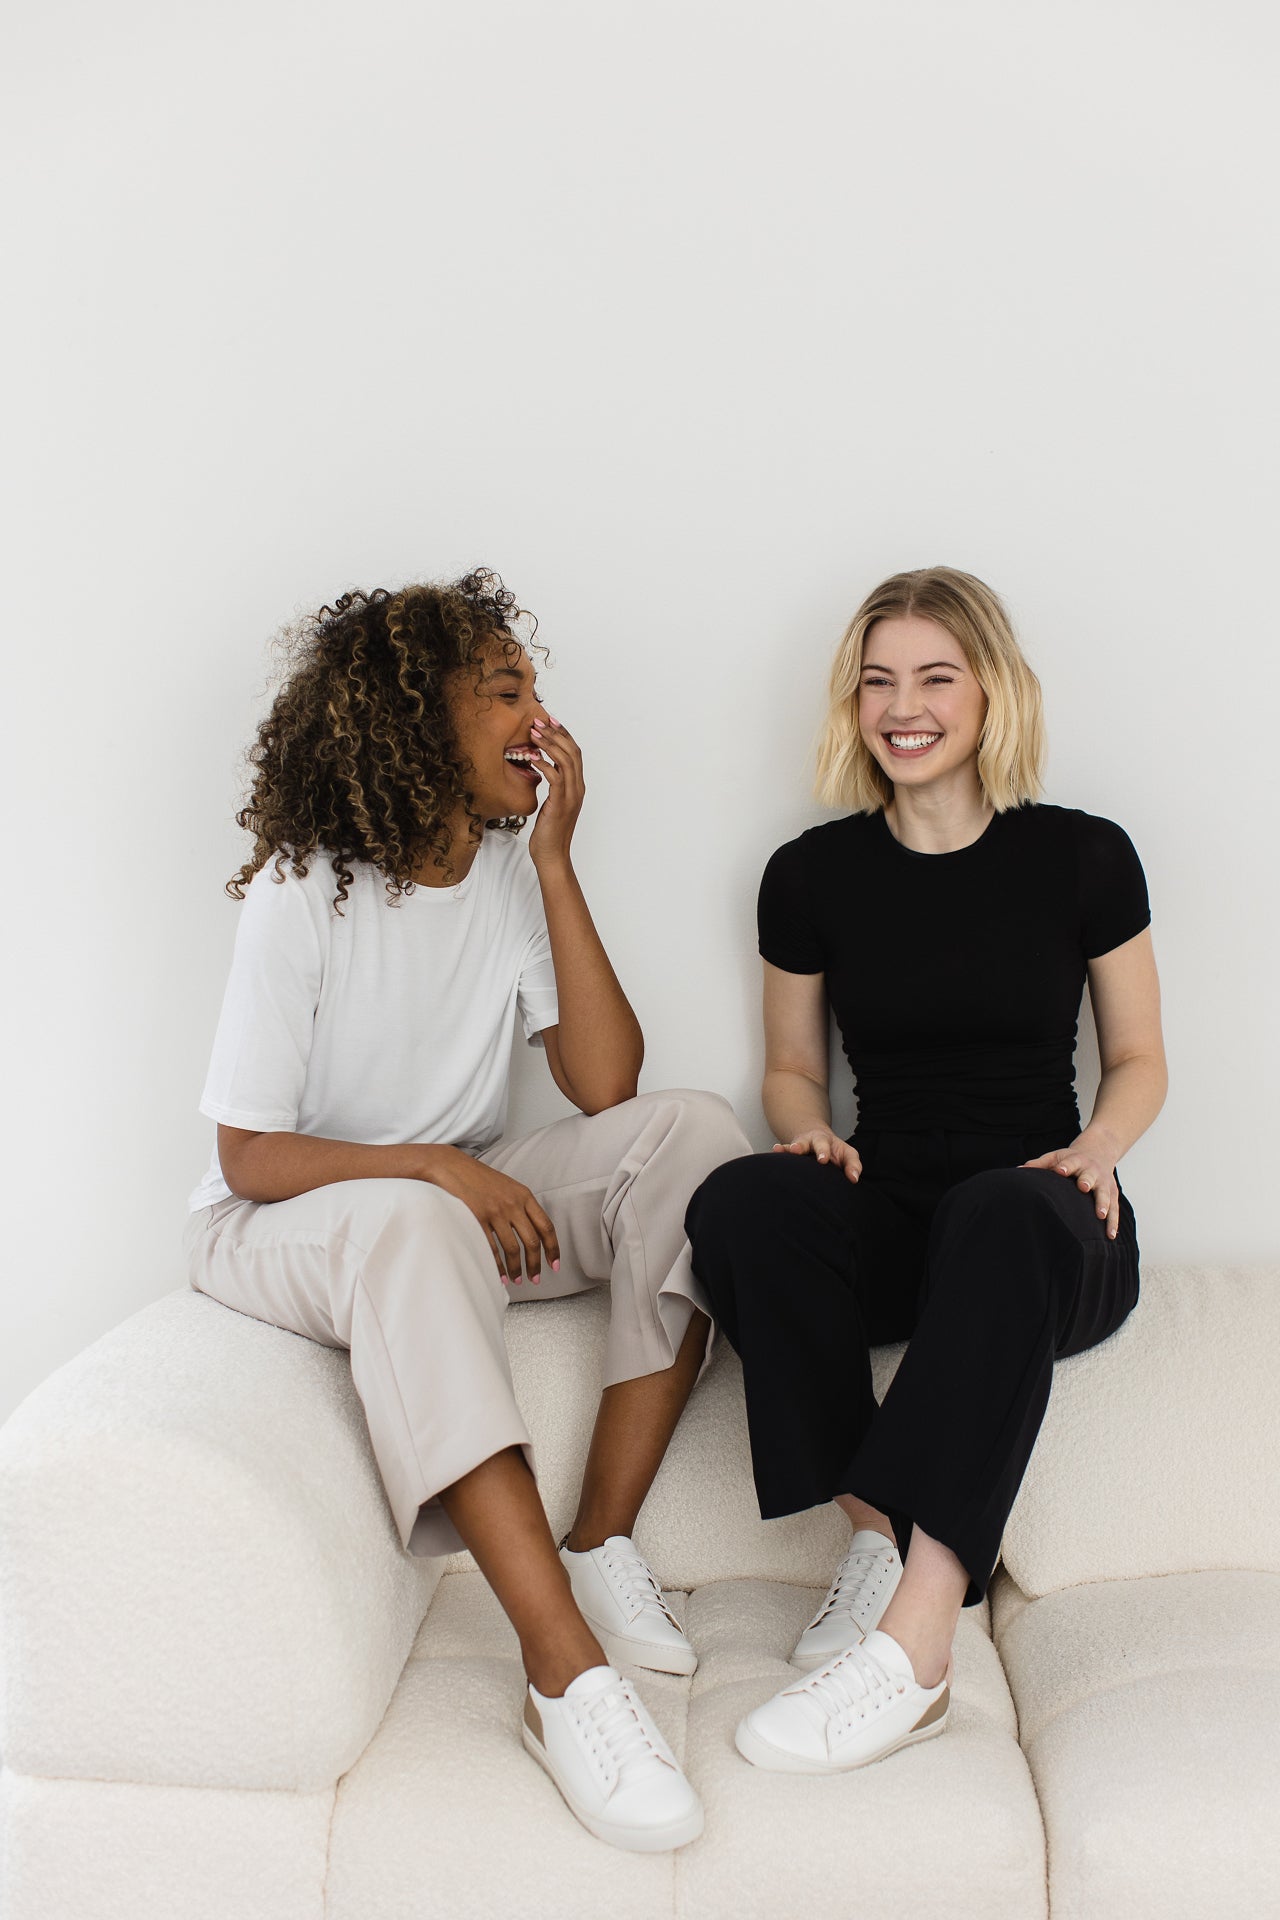 Two women sitting on a sofa laughing together